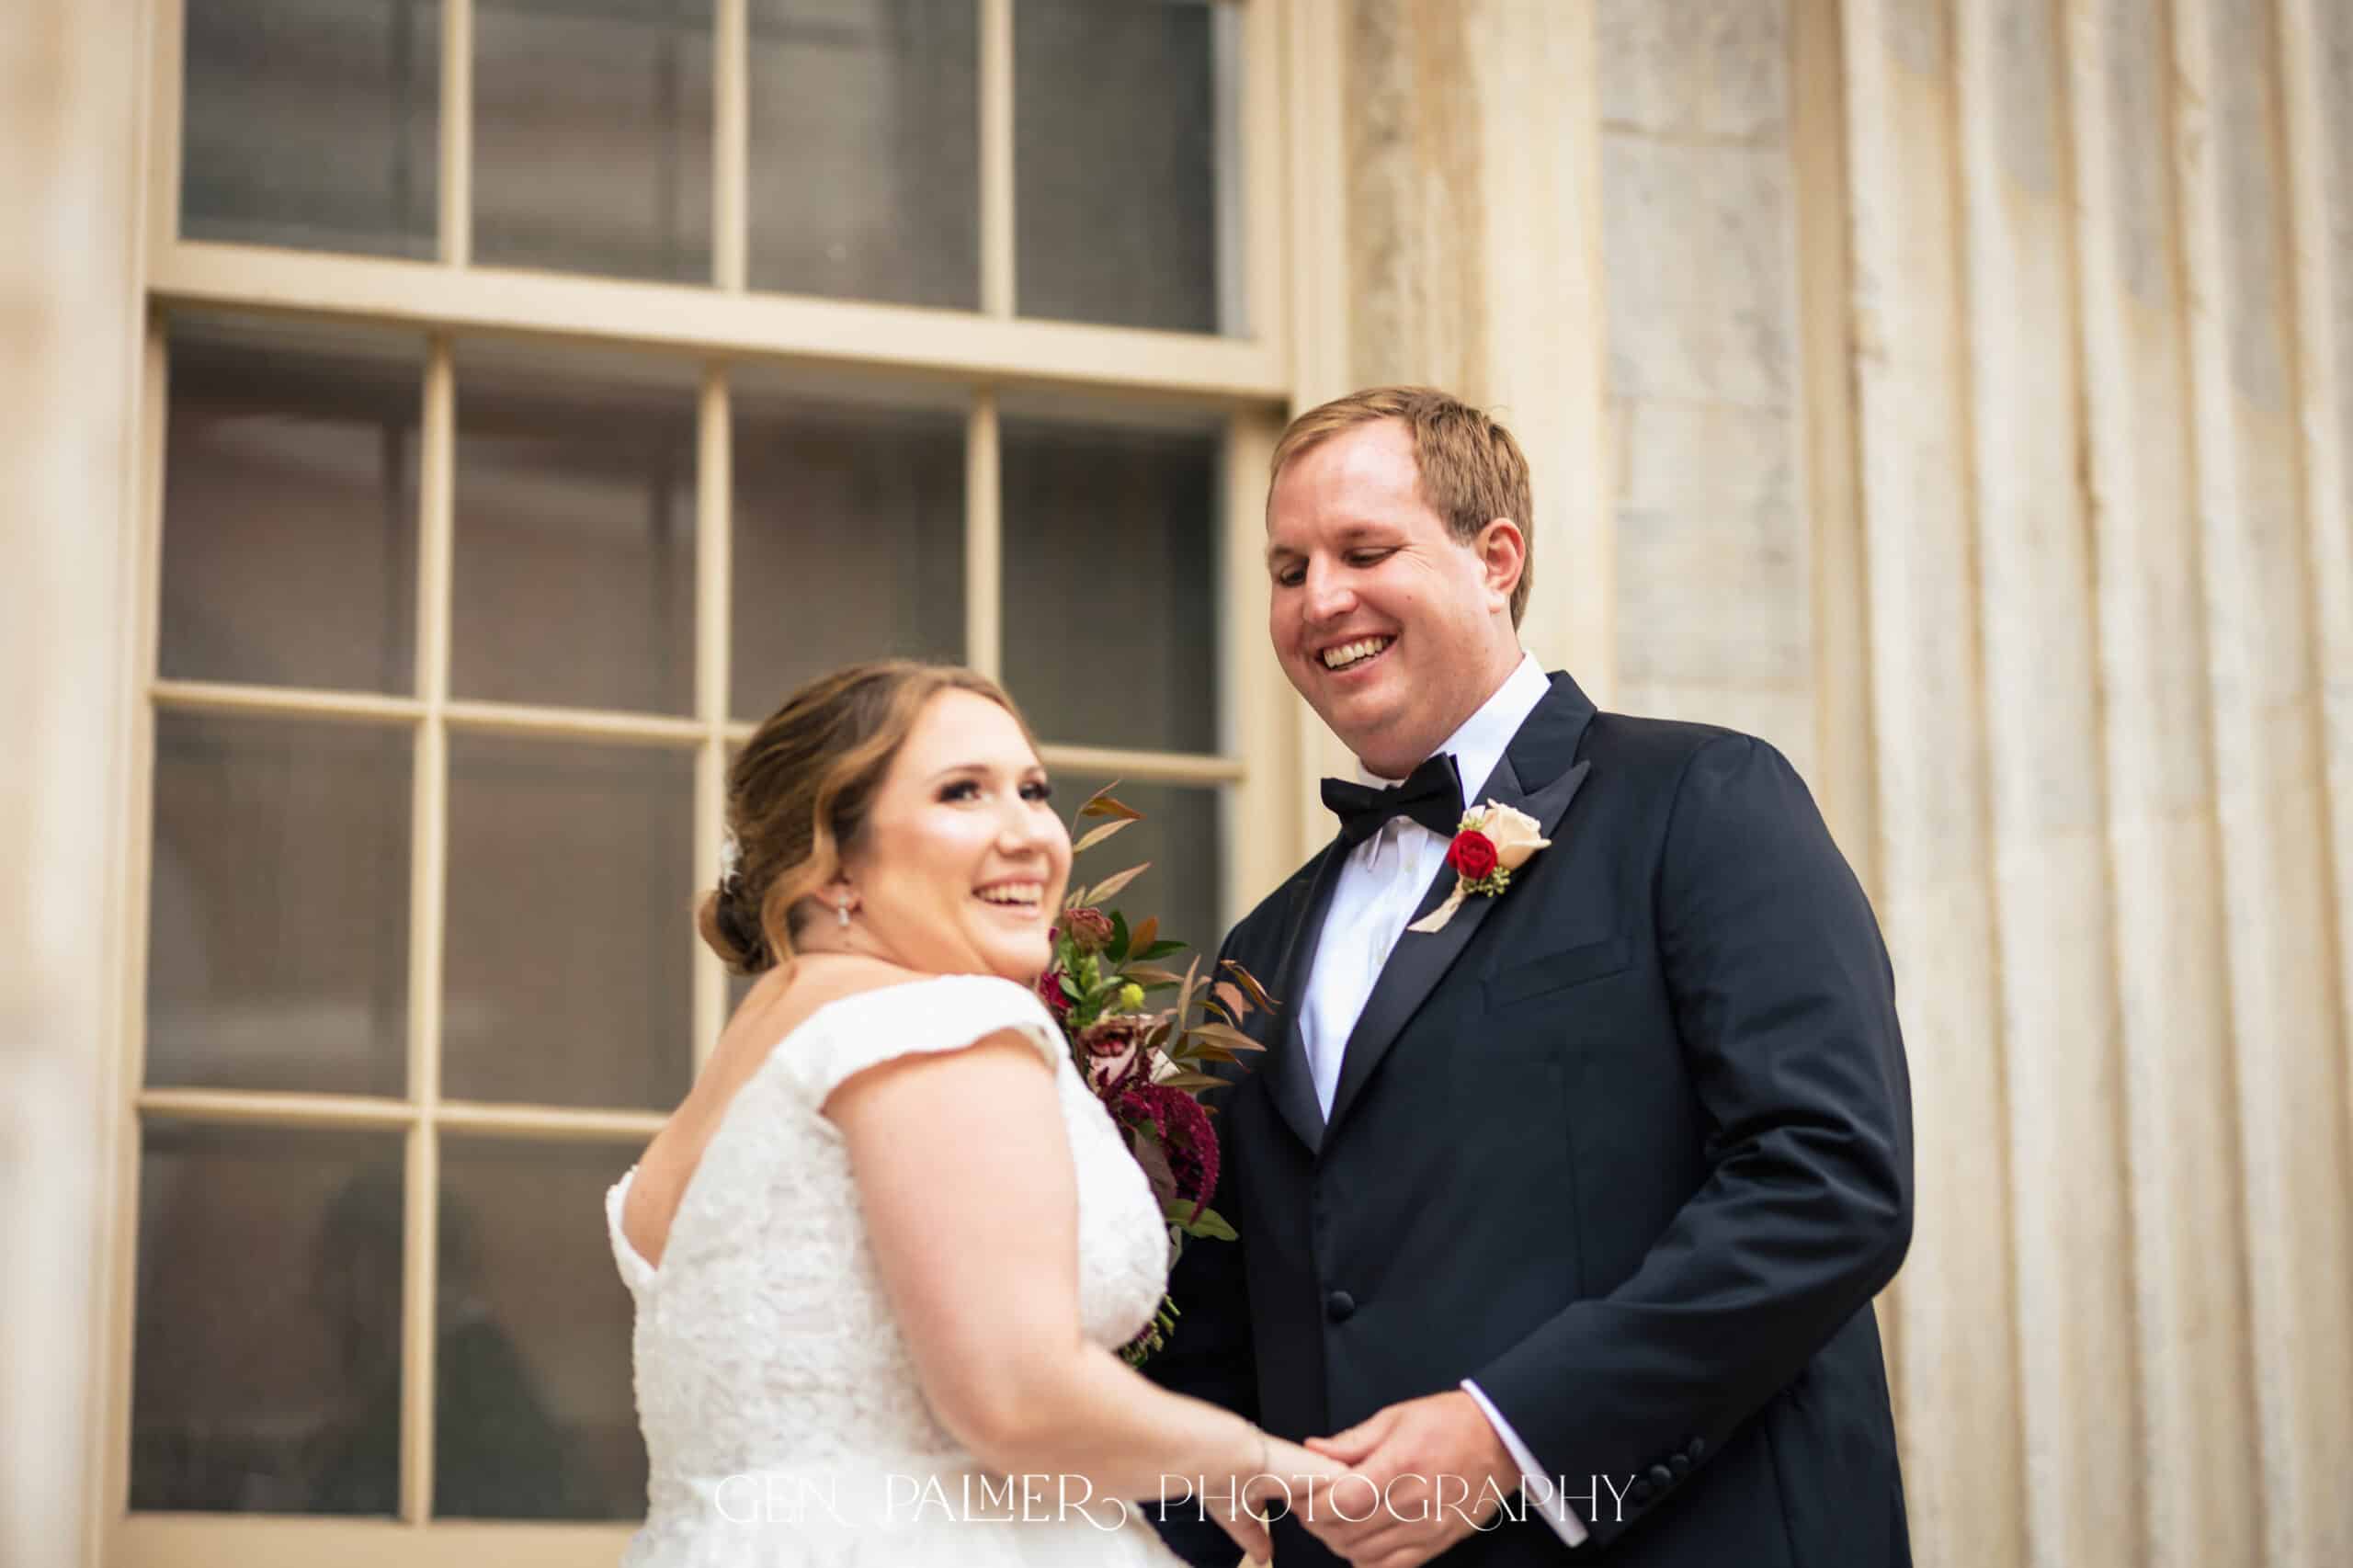 Deirdre & Patrick | Wedding at The College of Physicians